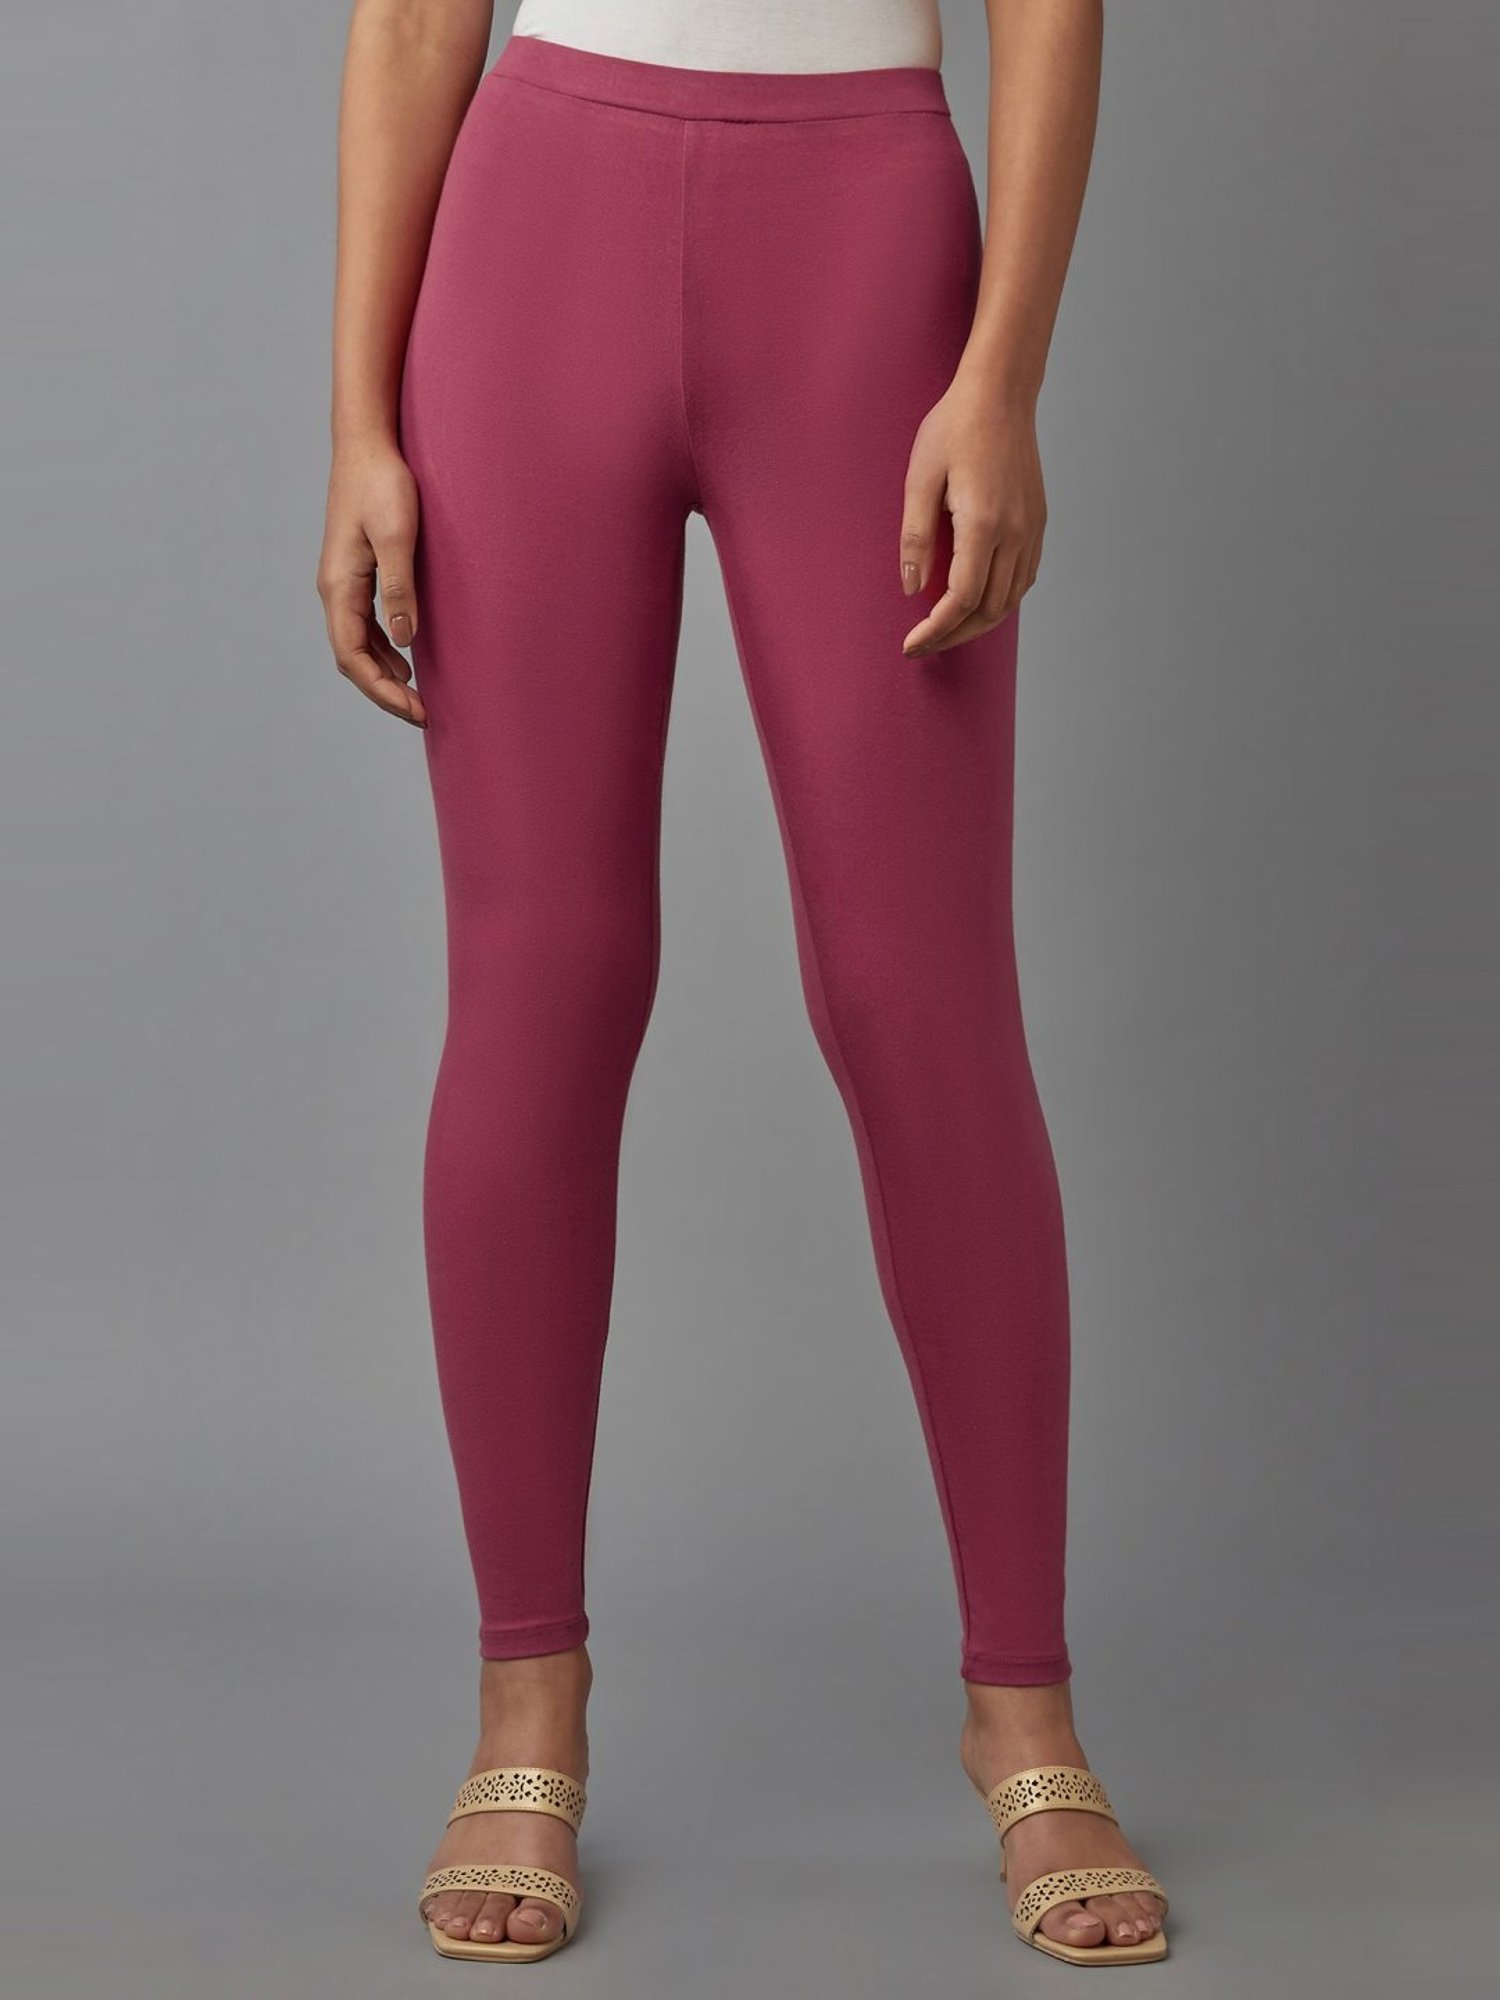 Buy Skechers Pink High Rise Tights for Women Online @ Tata CLiQ